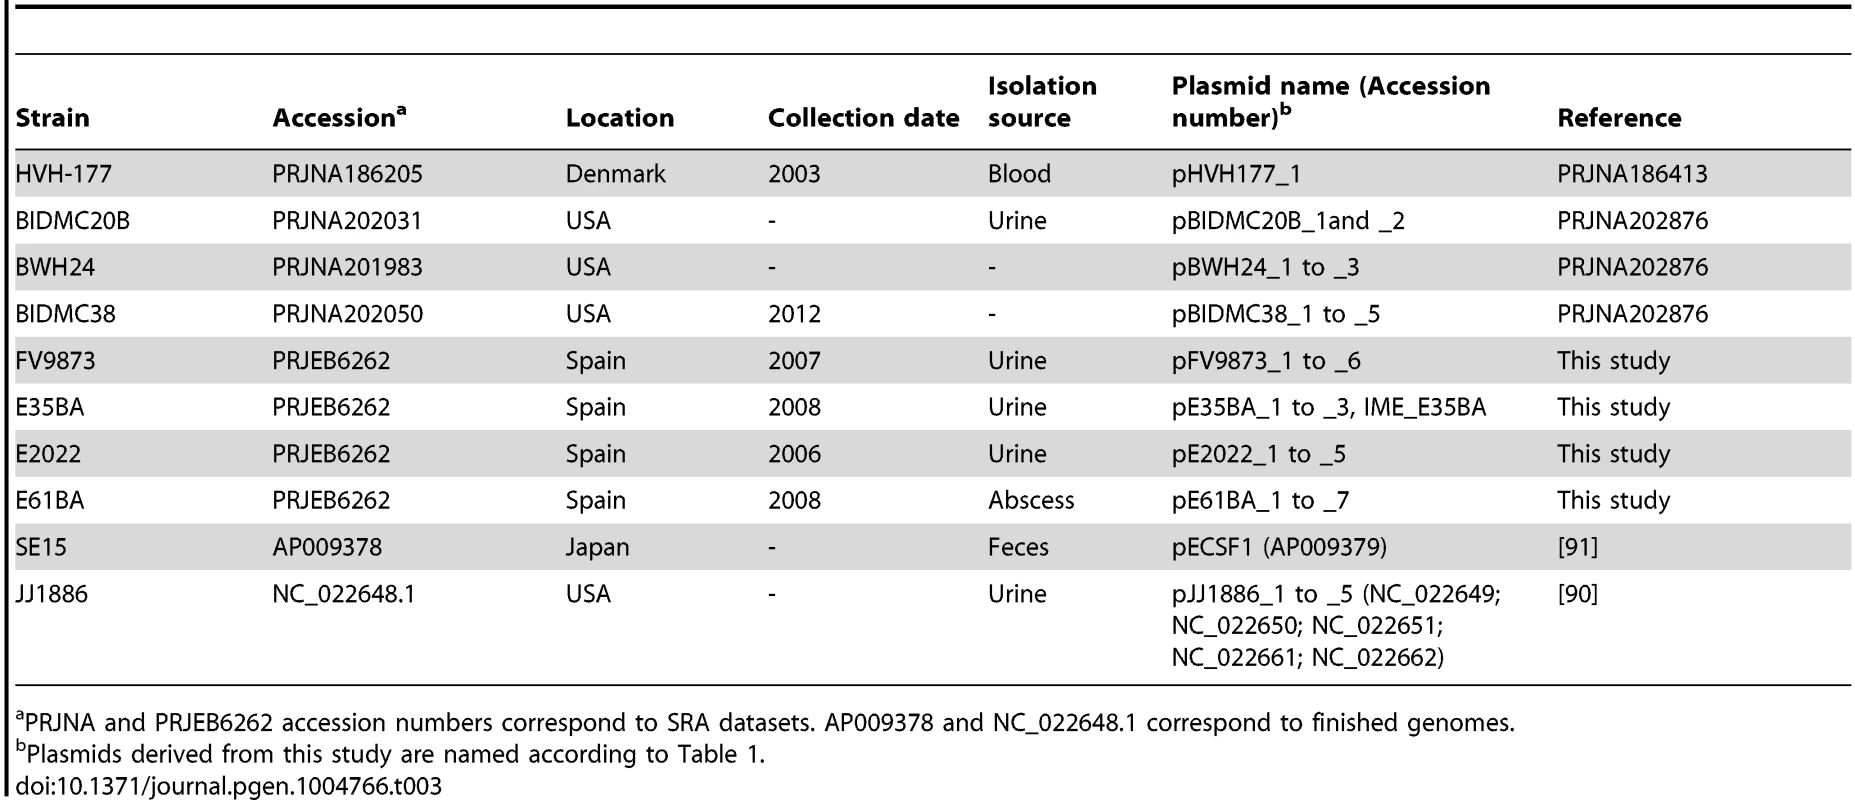 Human <i>E. coli</i> ST131 genomes analyzed in this work.